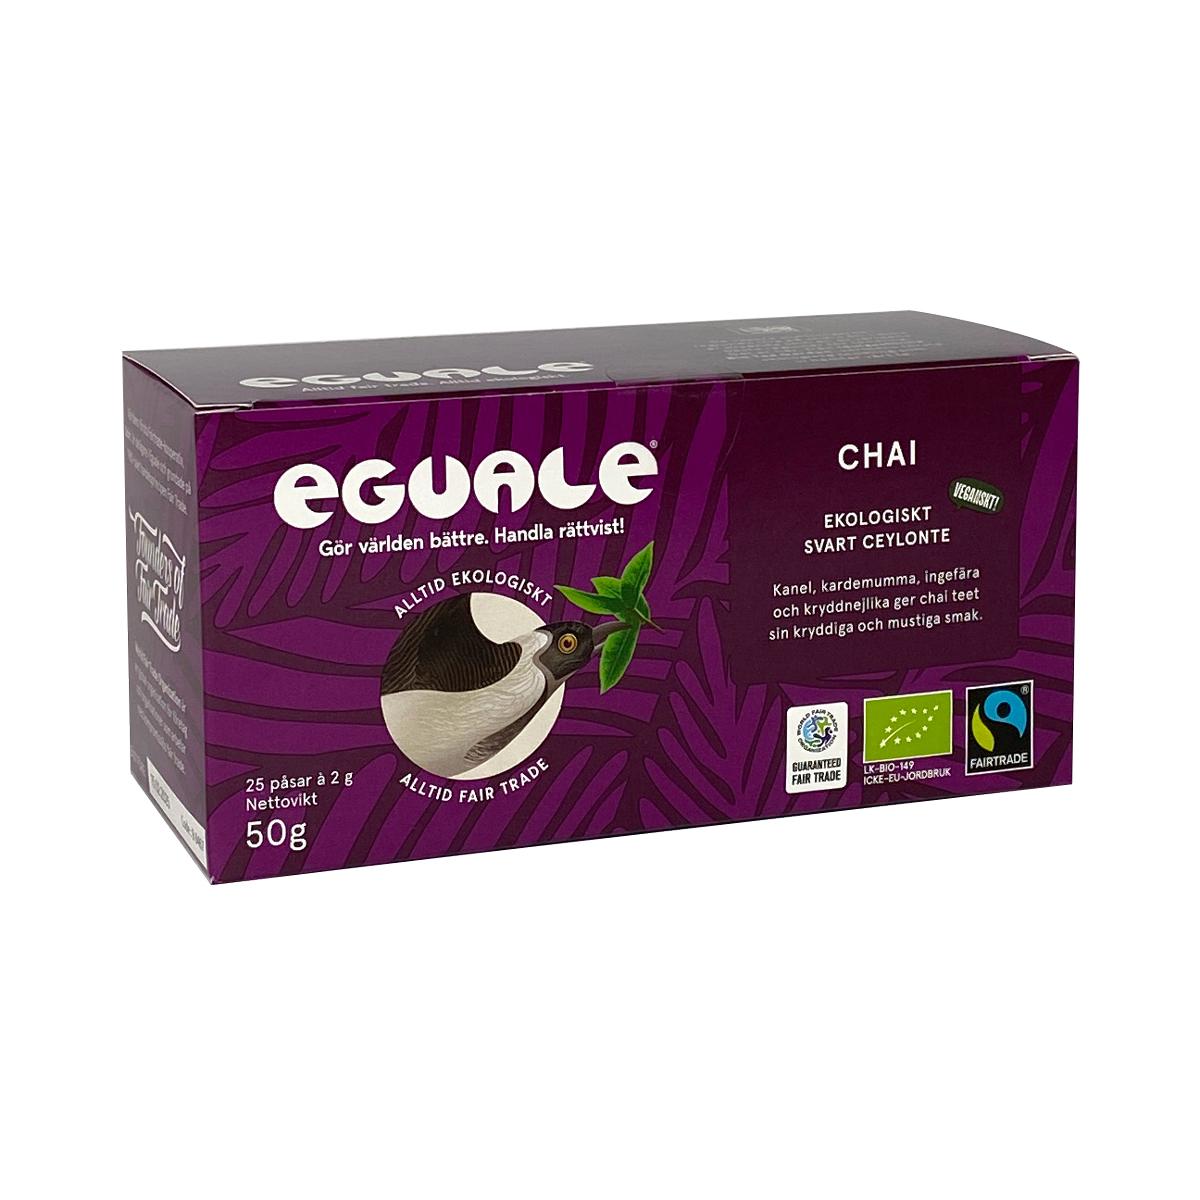 Eguale's Eguale Chai'